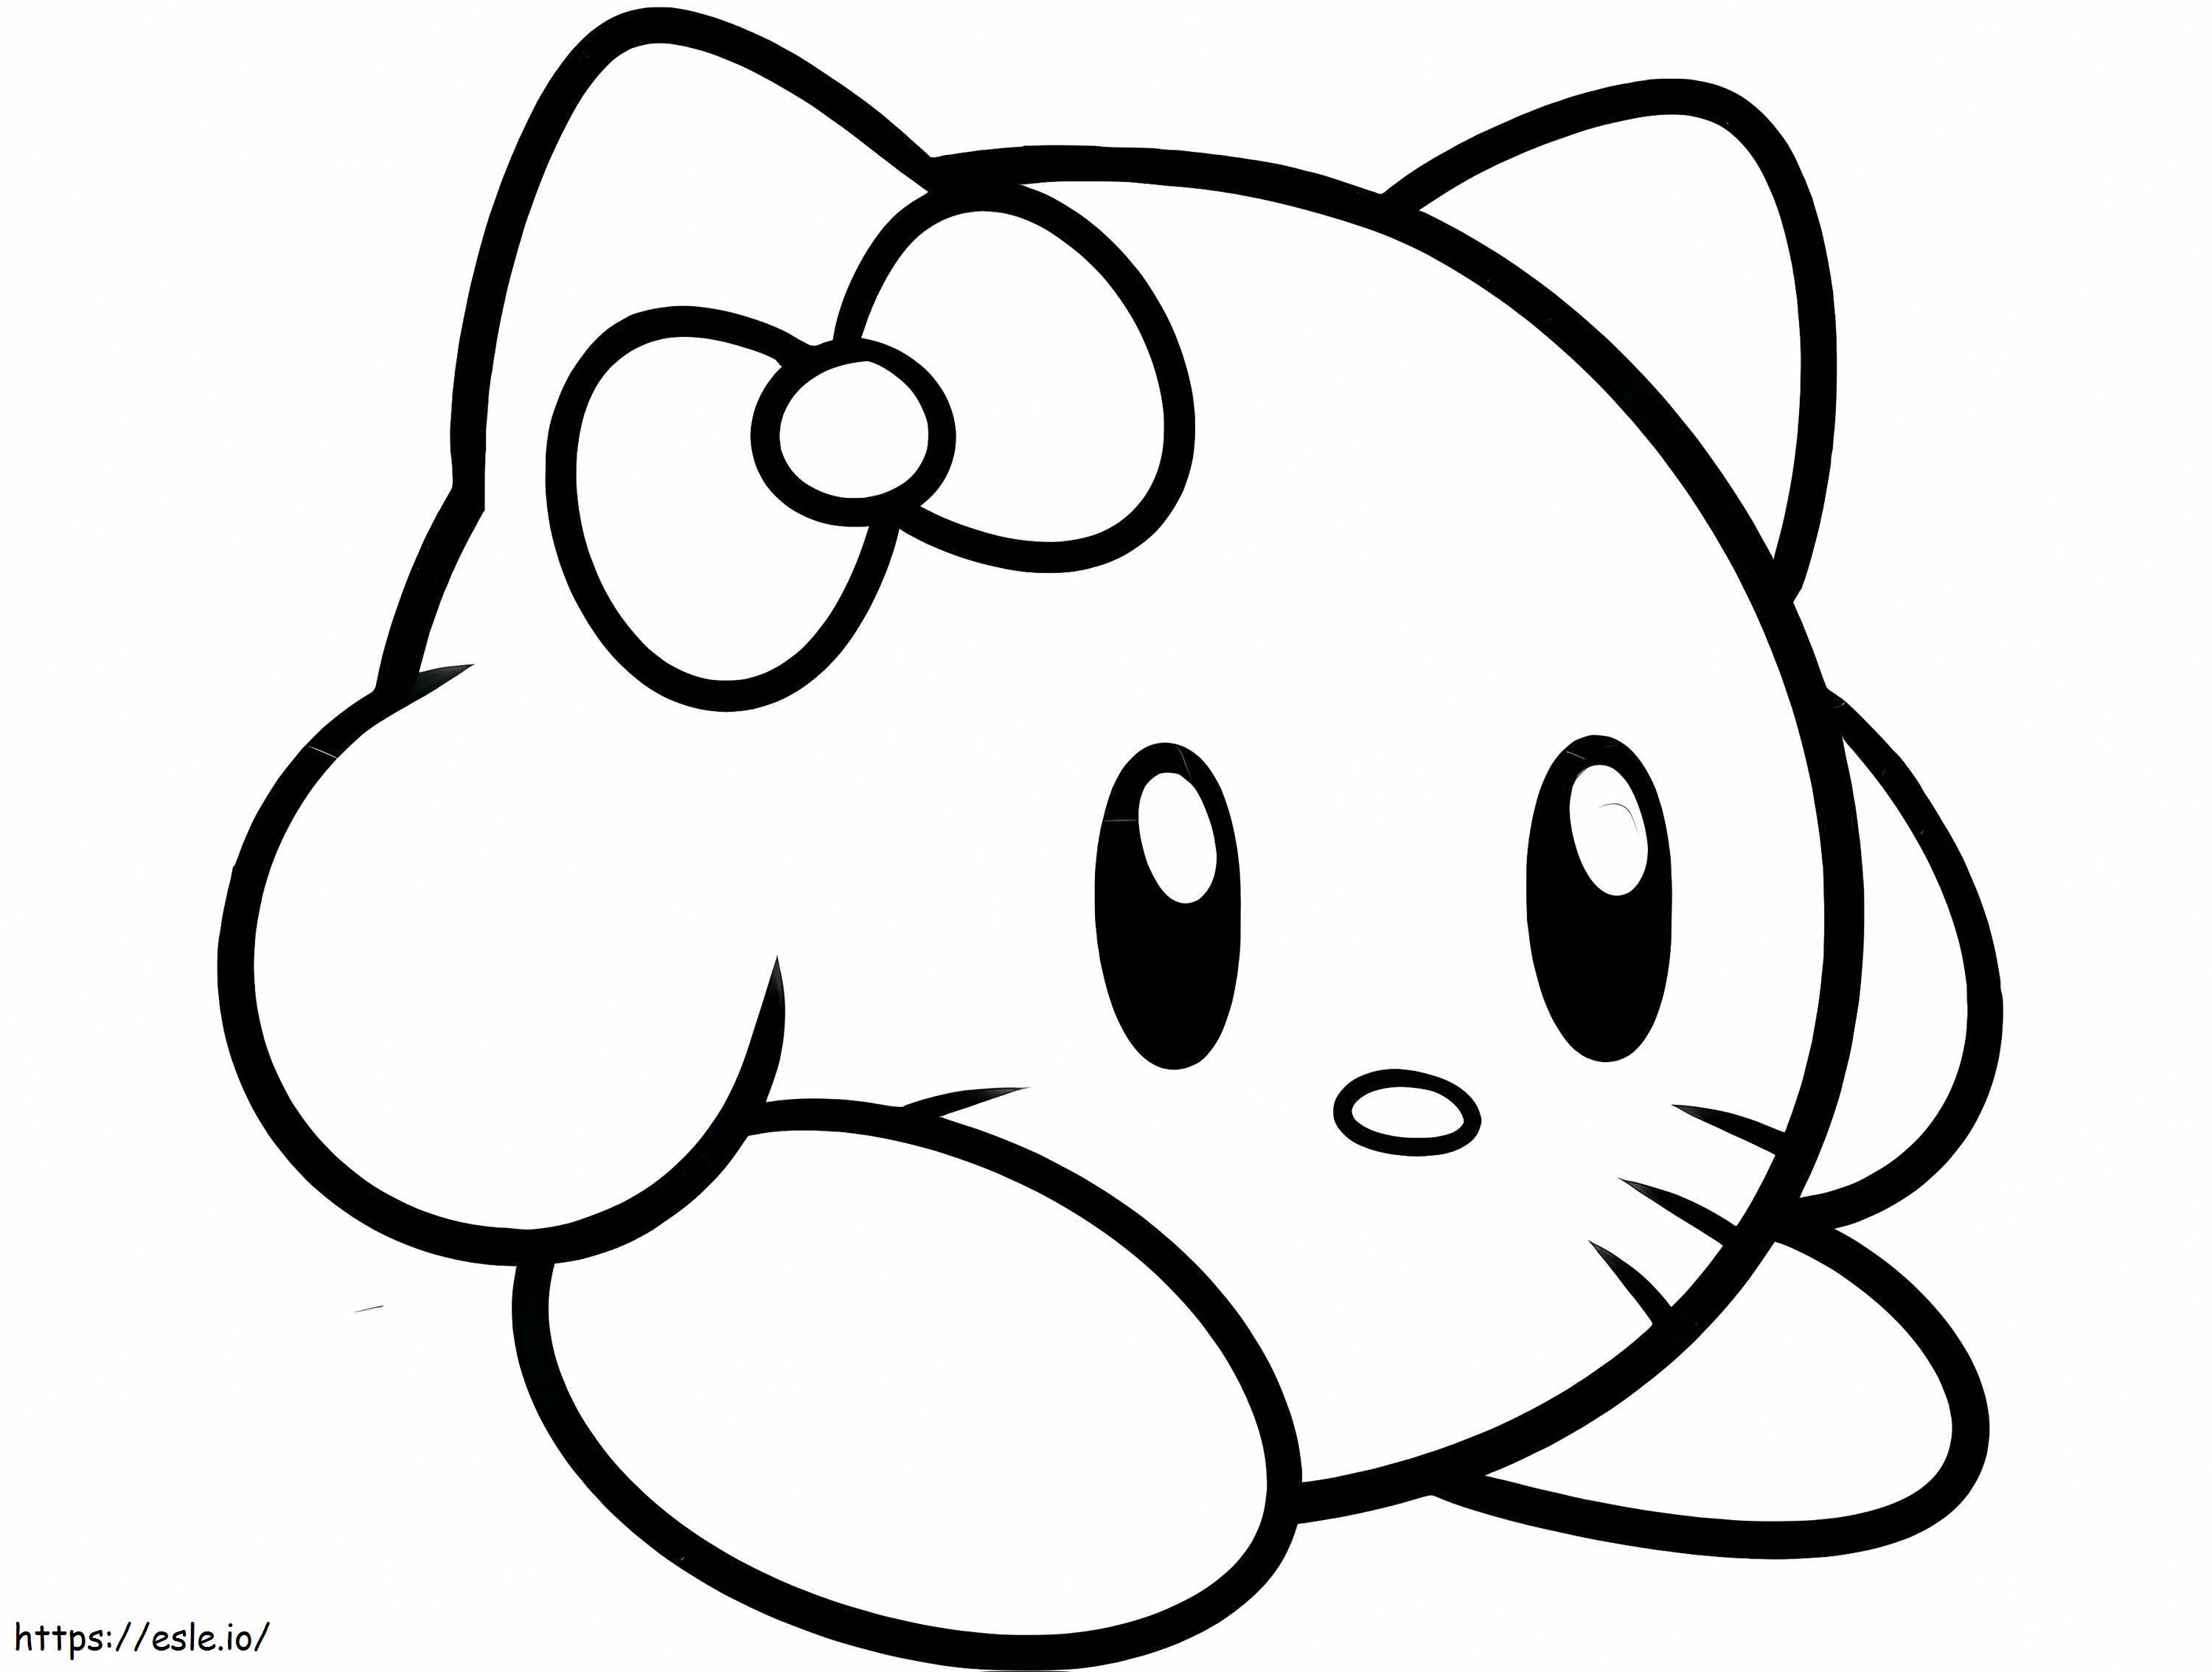 Kirby Hello Kitty coloring page